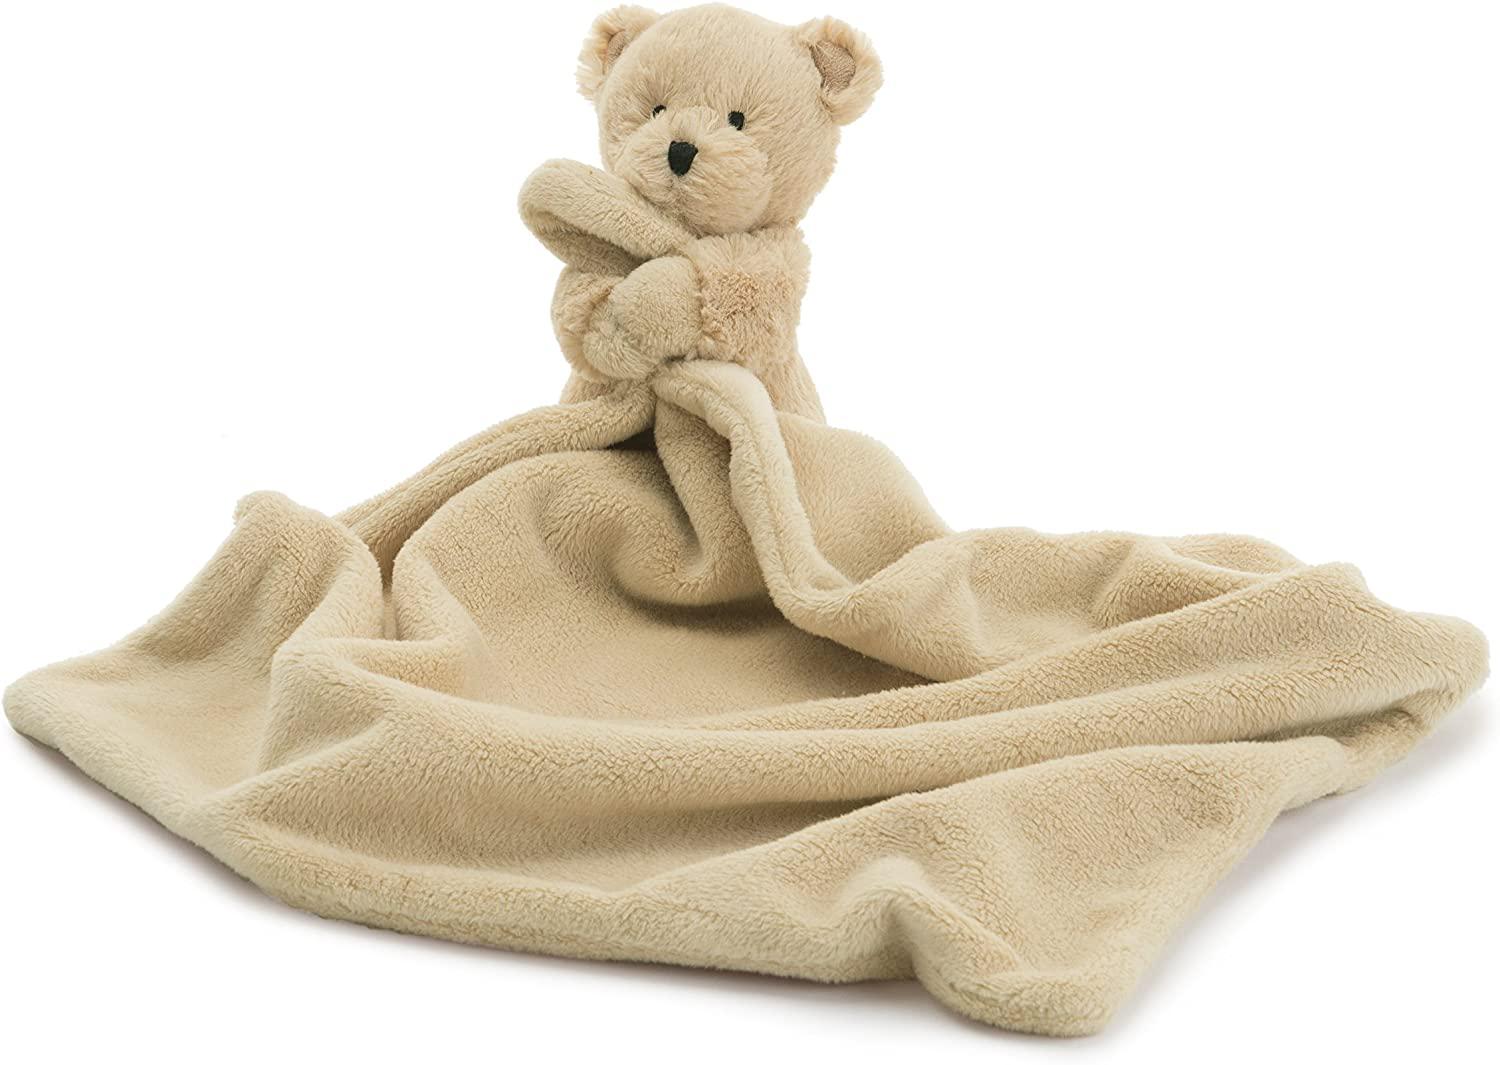 Personalized Baby Blanket And Stuffed Animal